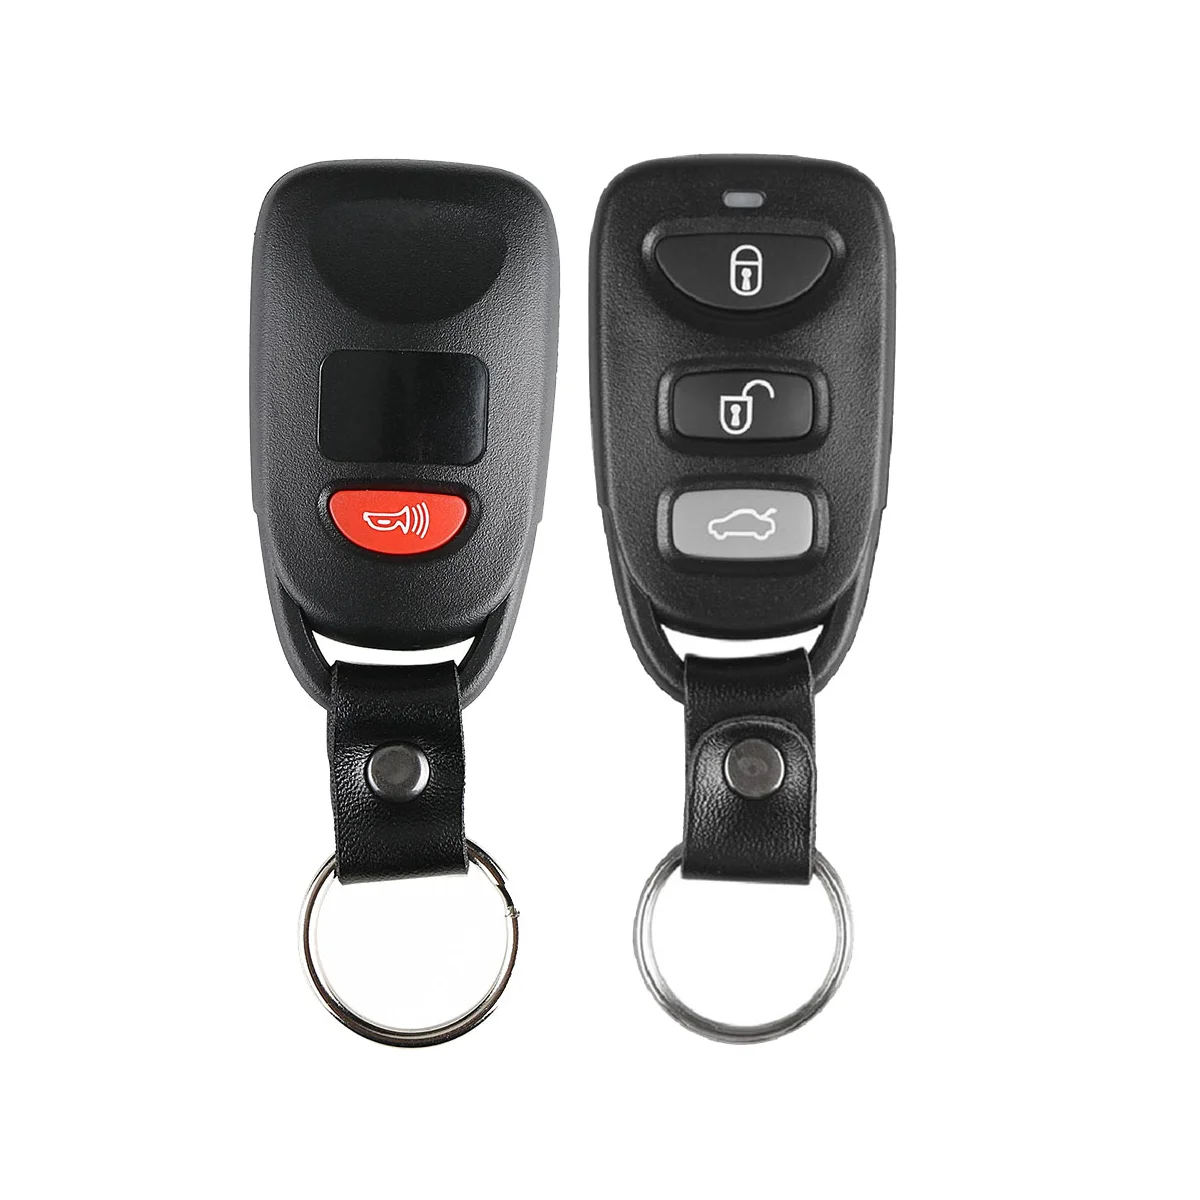 

For Xhorse XKHY01EN Universal Wire Remote Key Fob 3+1 Button for Hyundai Style for VVDI Key Tool